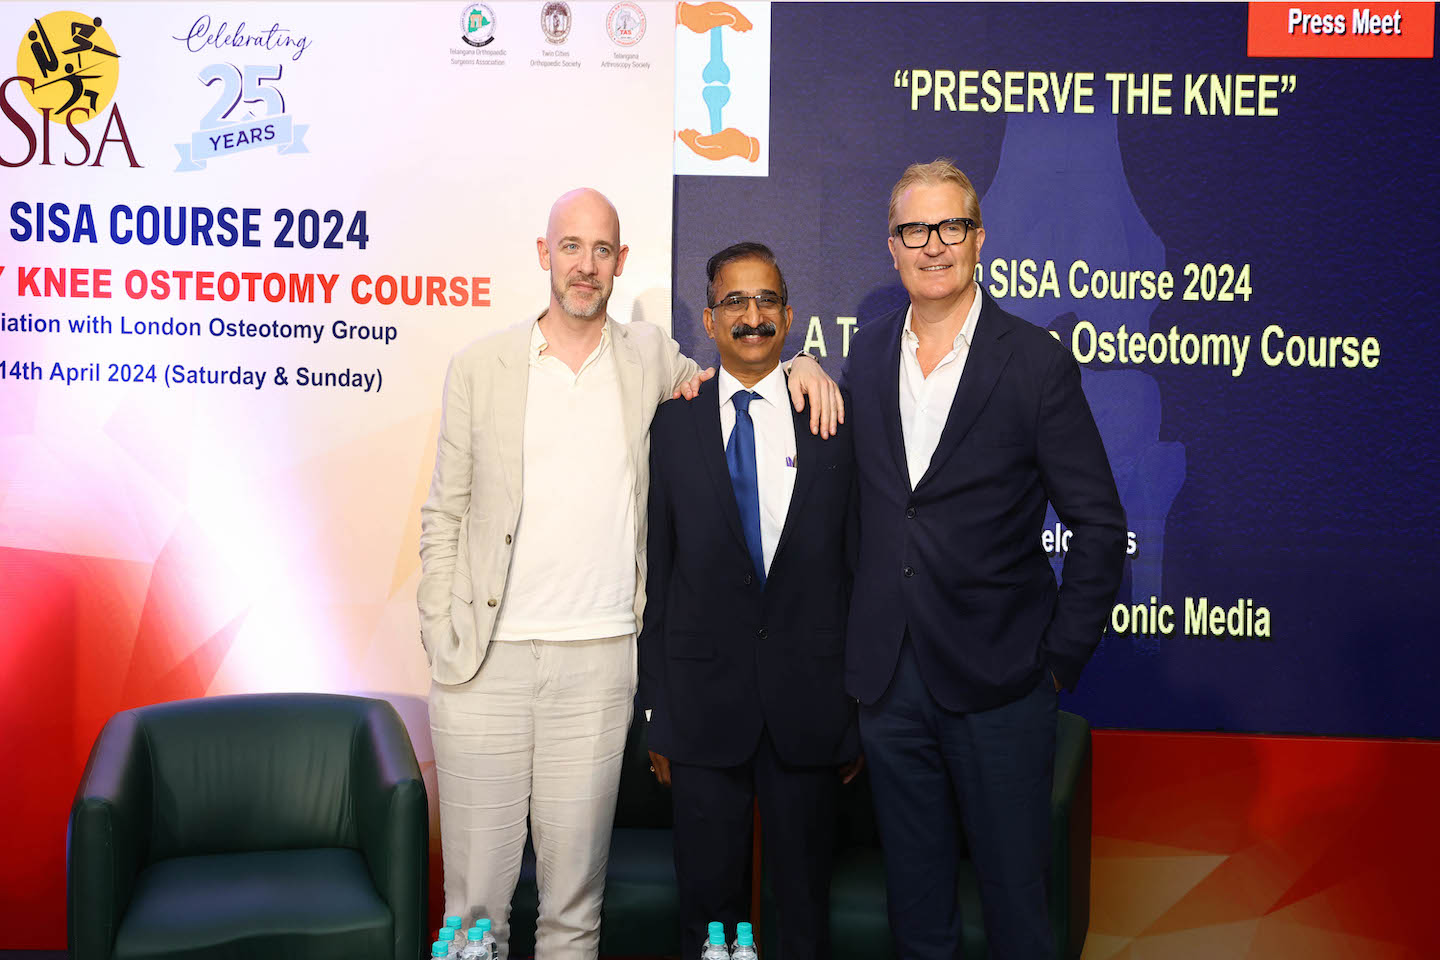 A novel surgical procedure,High Tibial Osteotomy(HTO), showcased at the Conference [Video]